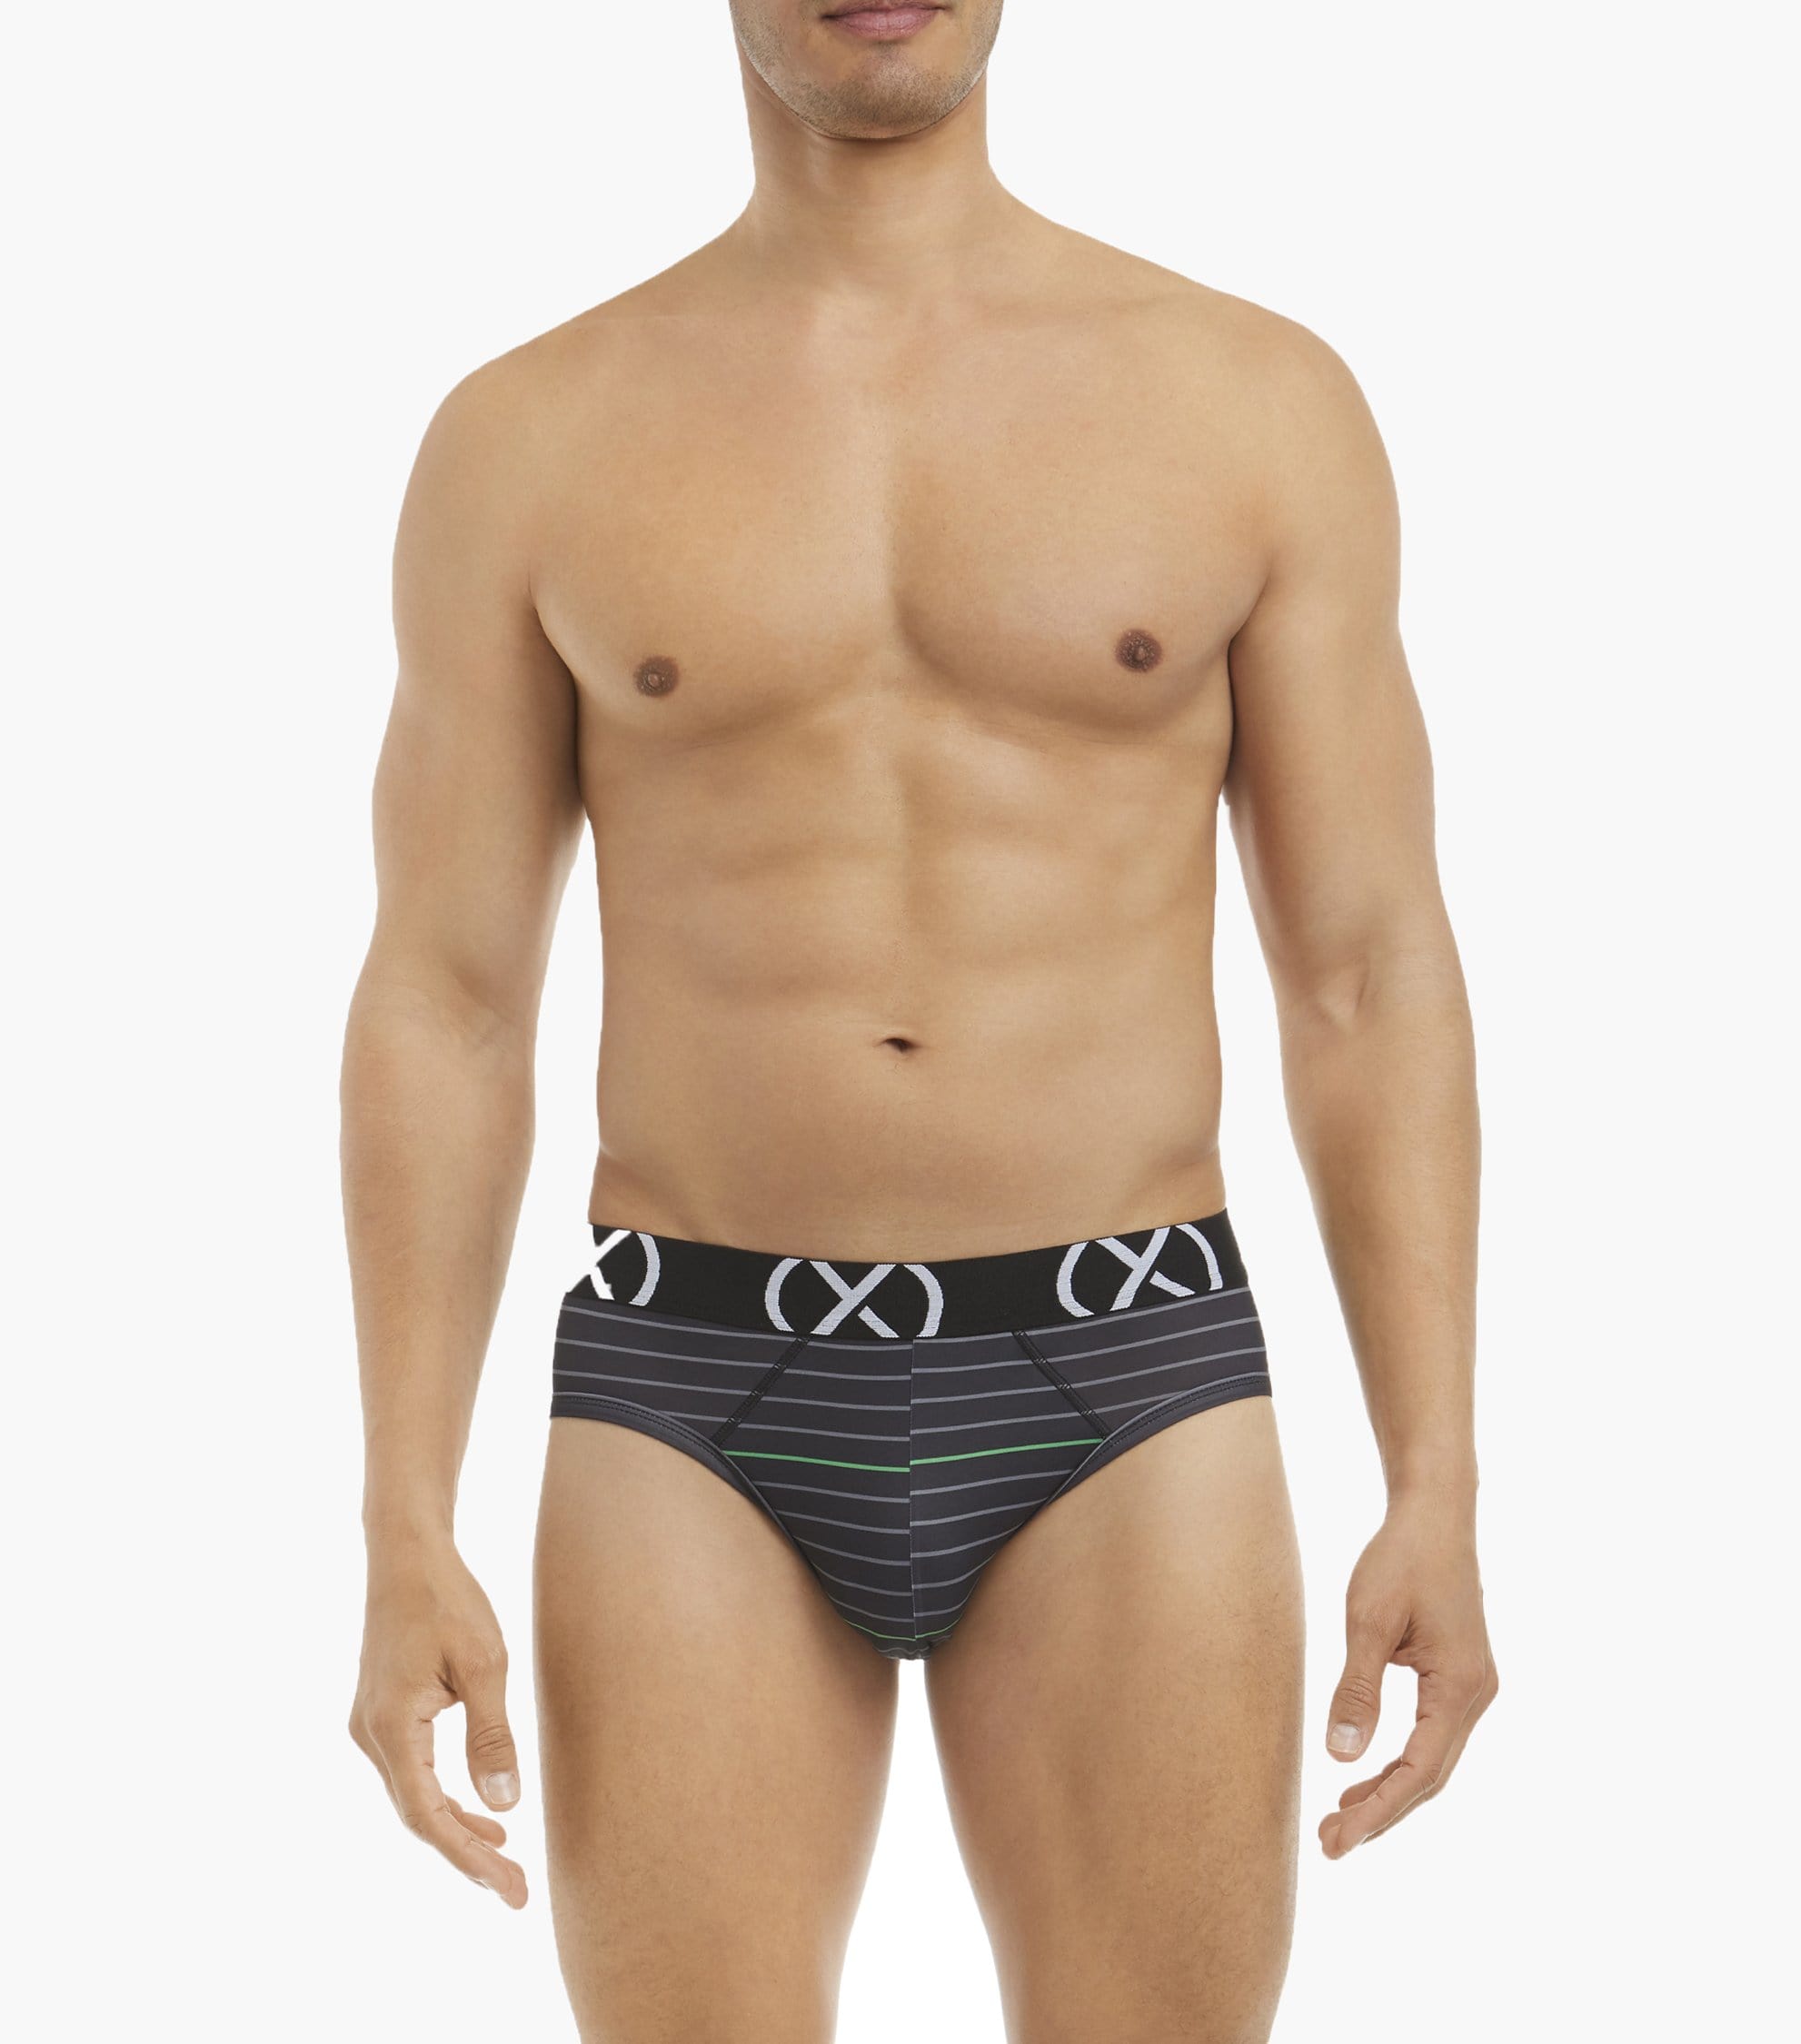 2(X)IST unveils its latest high-end underwear collection dubbed